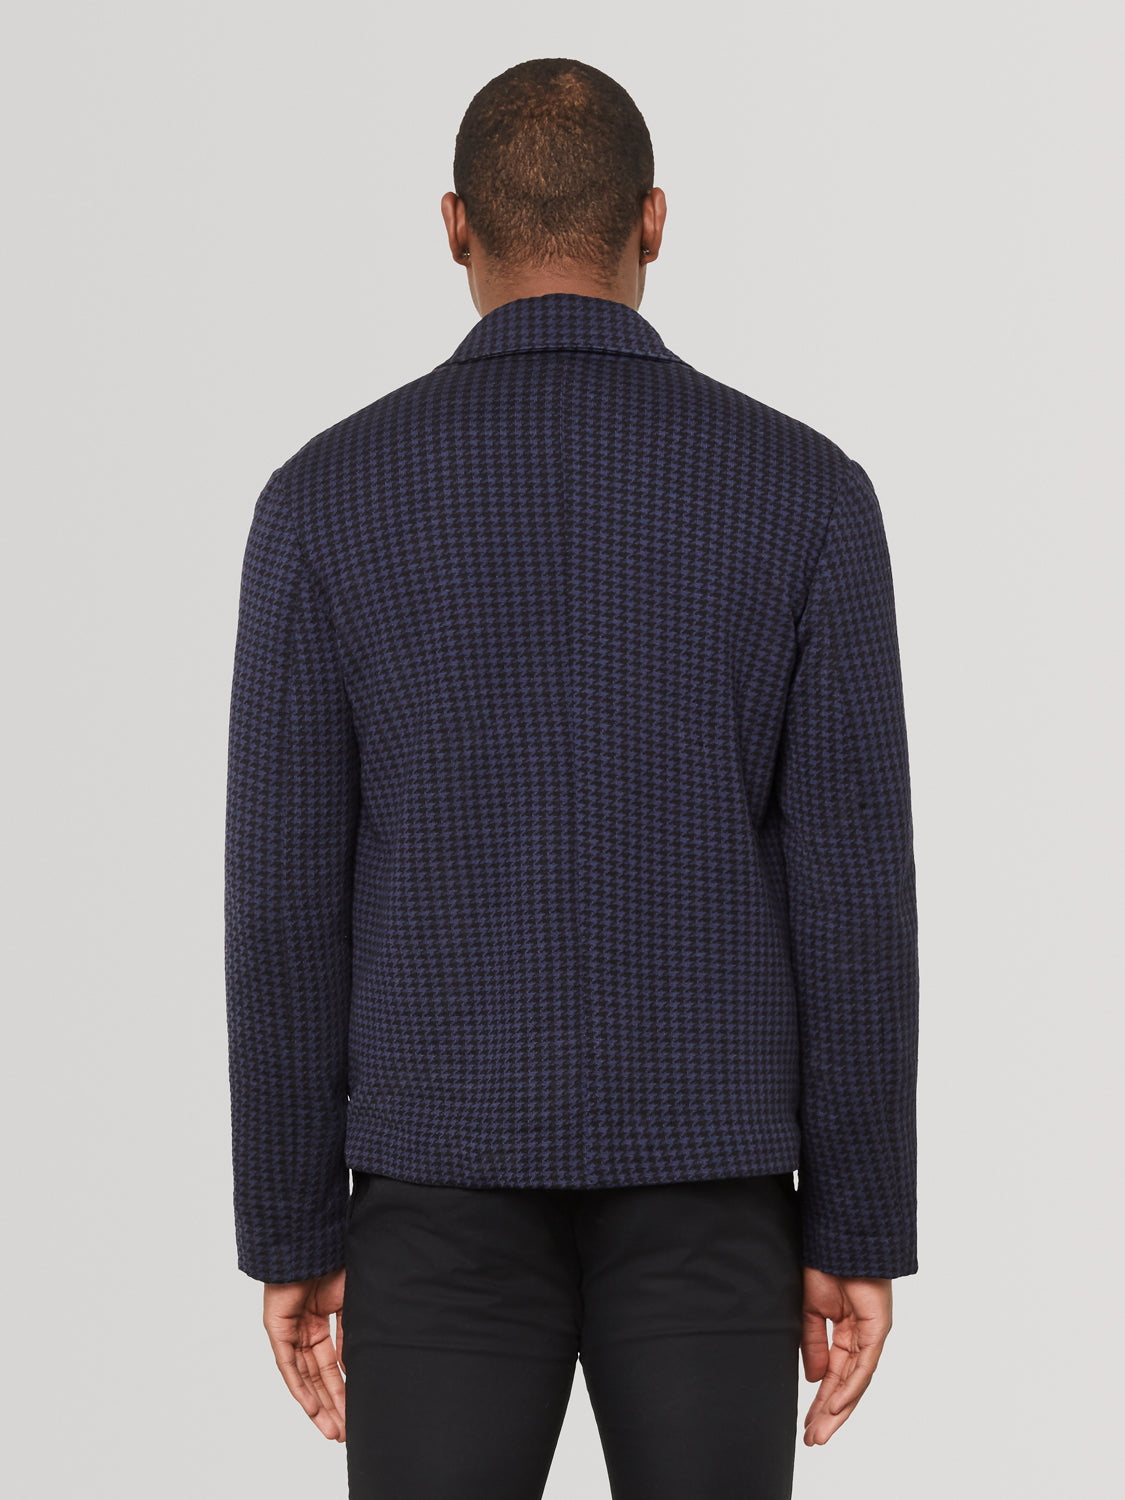 Houndstooth Knitted Jacket - Navy & Black